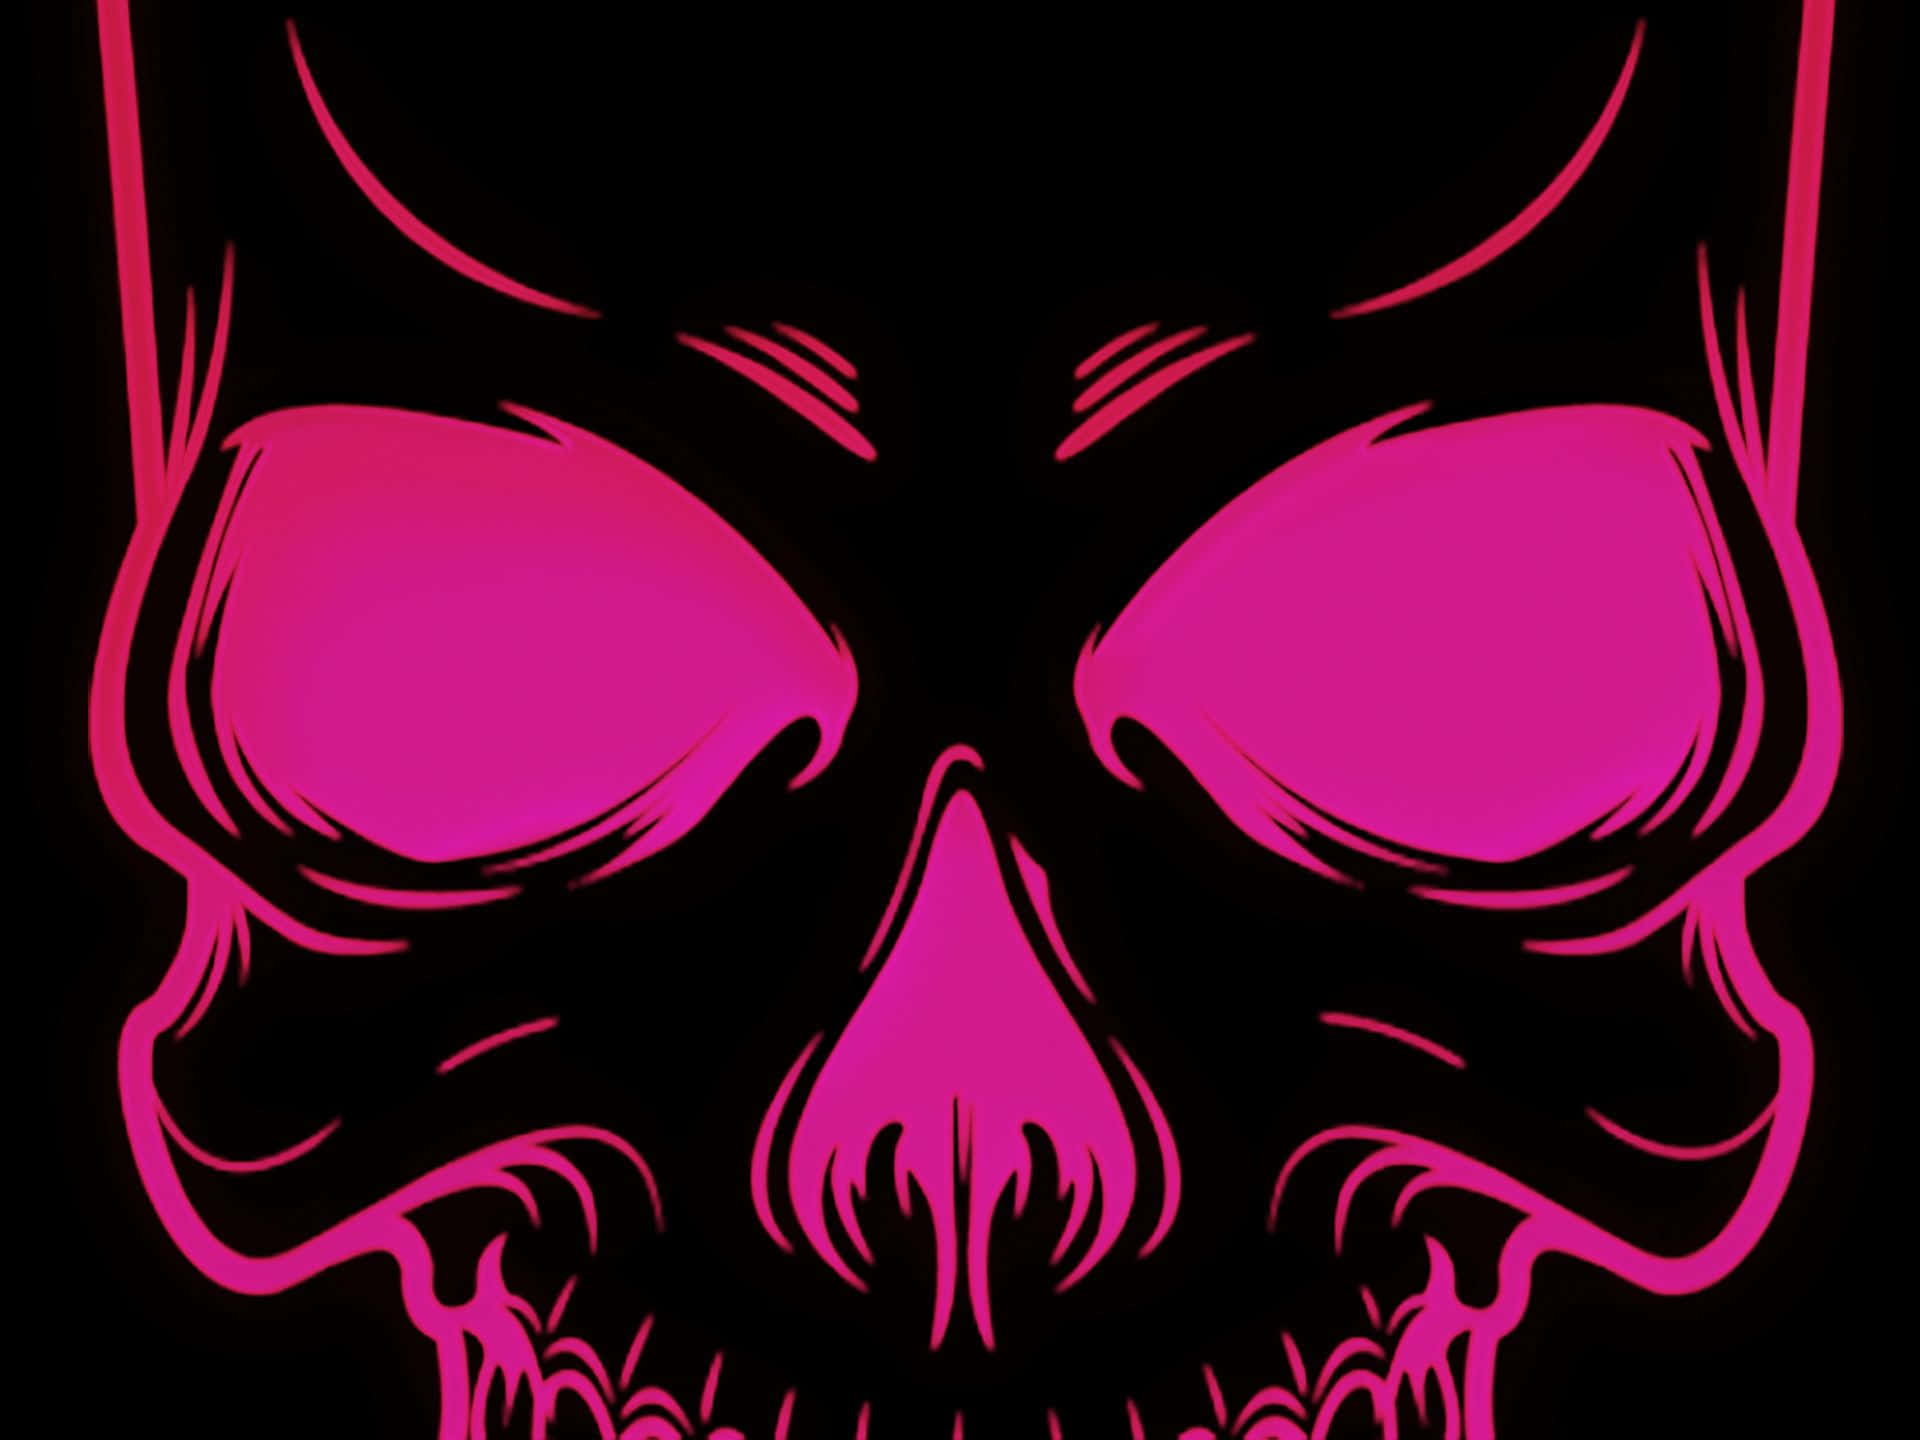 Represent a Fearless Attitude With Pink Skull Art Wallpaper